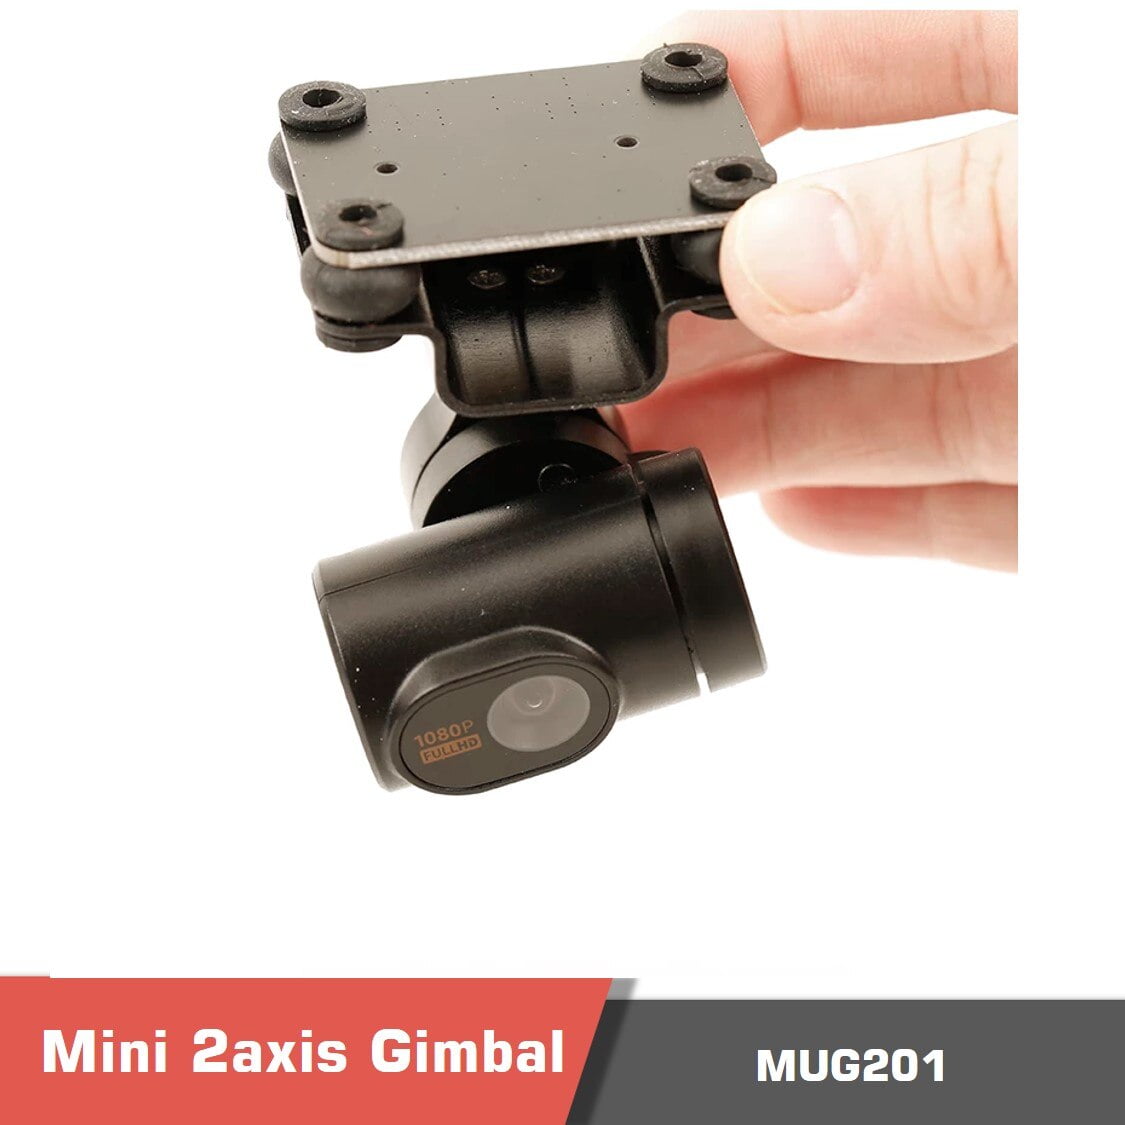 Mini 2axis gimbal for drones, mug201 full hd motionew